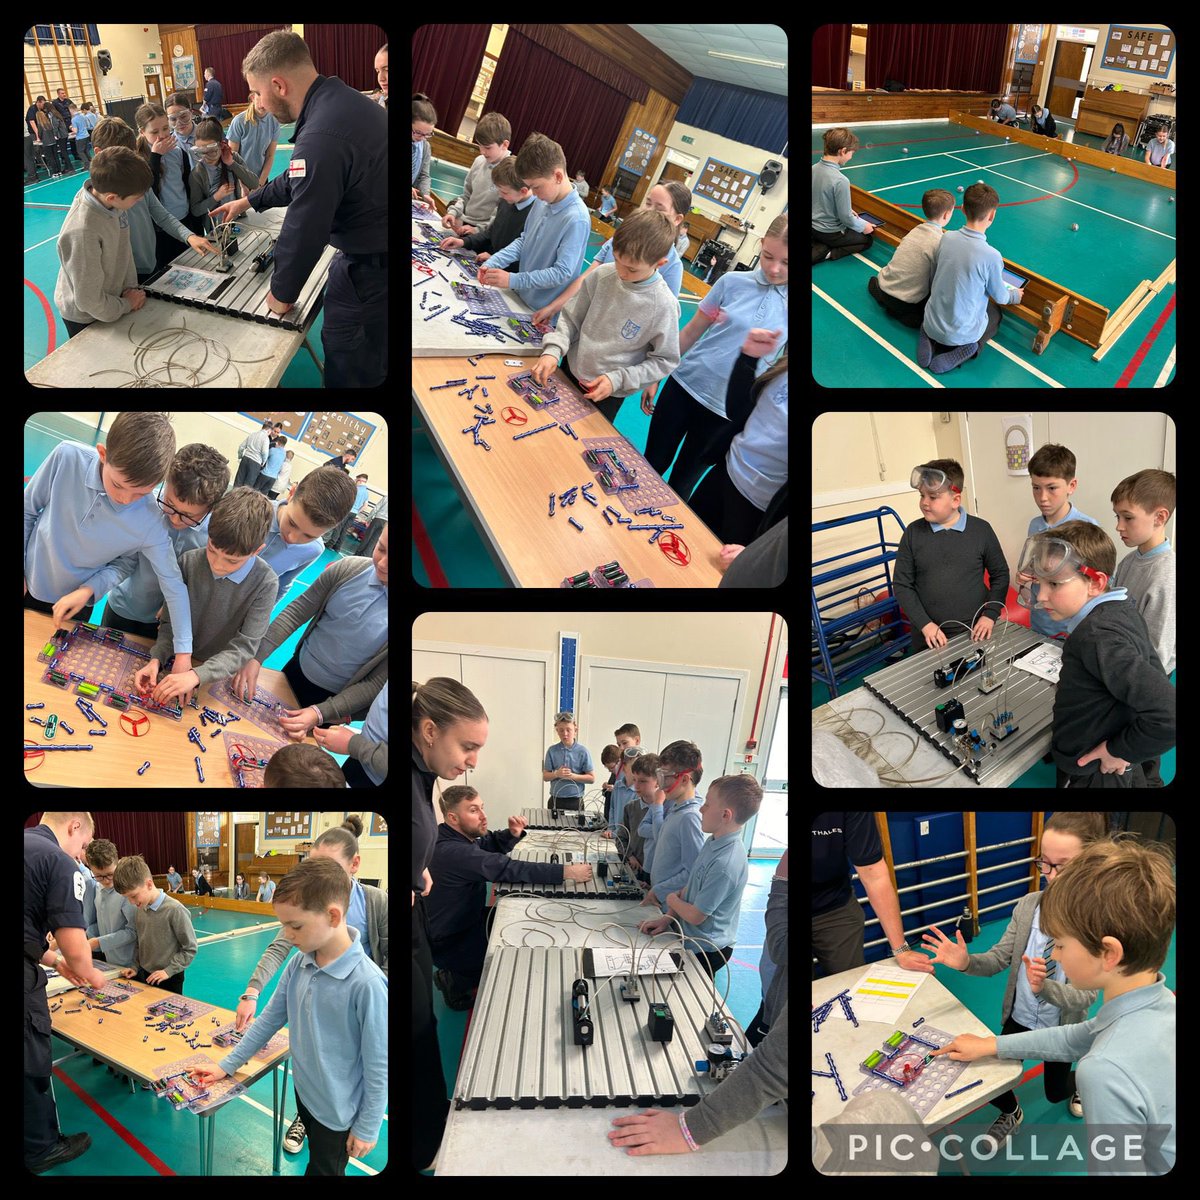 P6 had a great morning visiting the STEM event led by @thalesgroup and @RoyalNavy today. They showed great team work and collaboration.